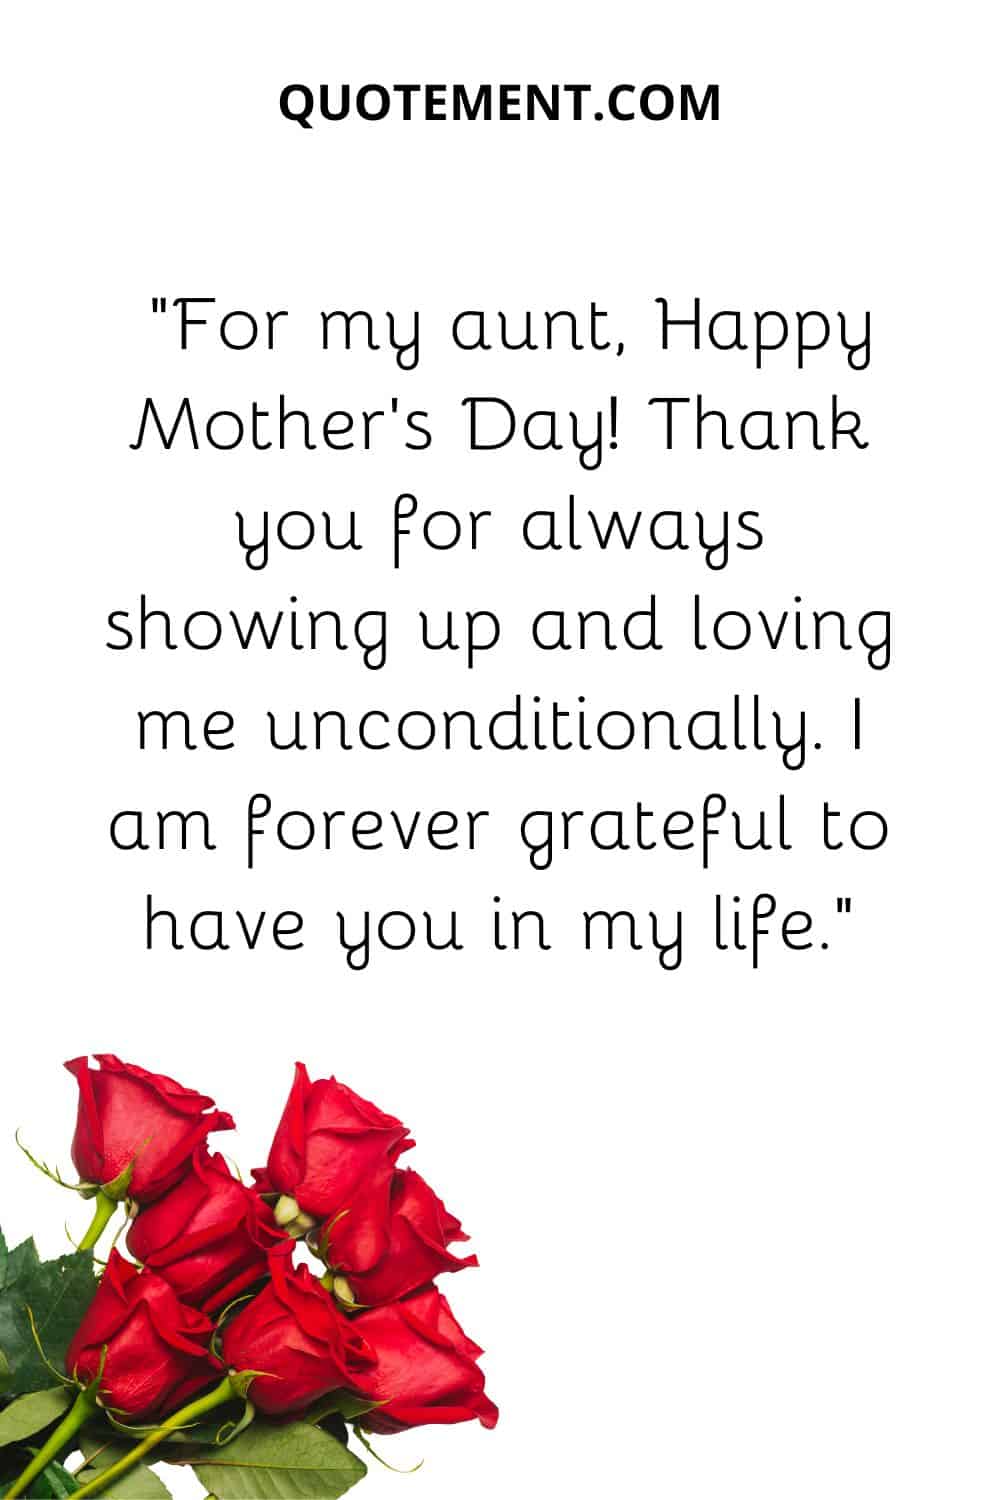 For my aunt, Happy Mother’s Day